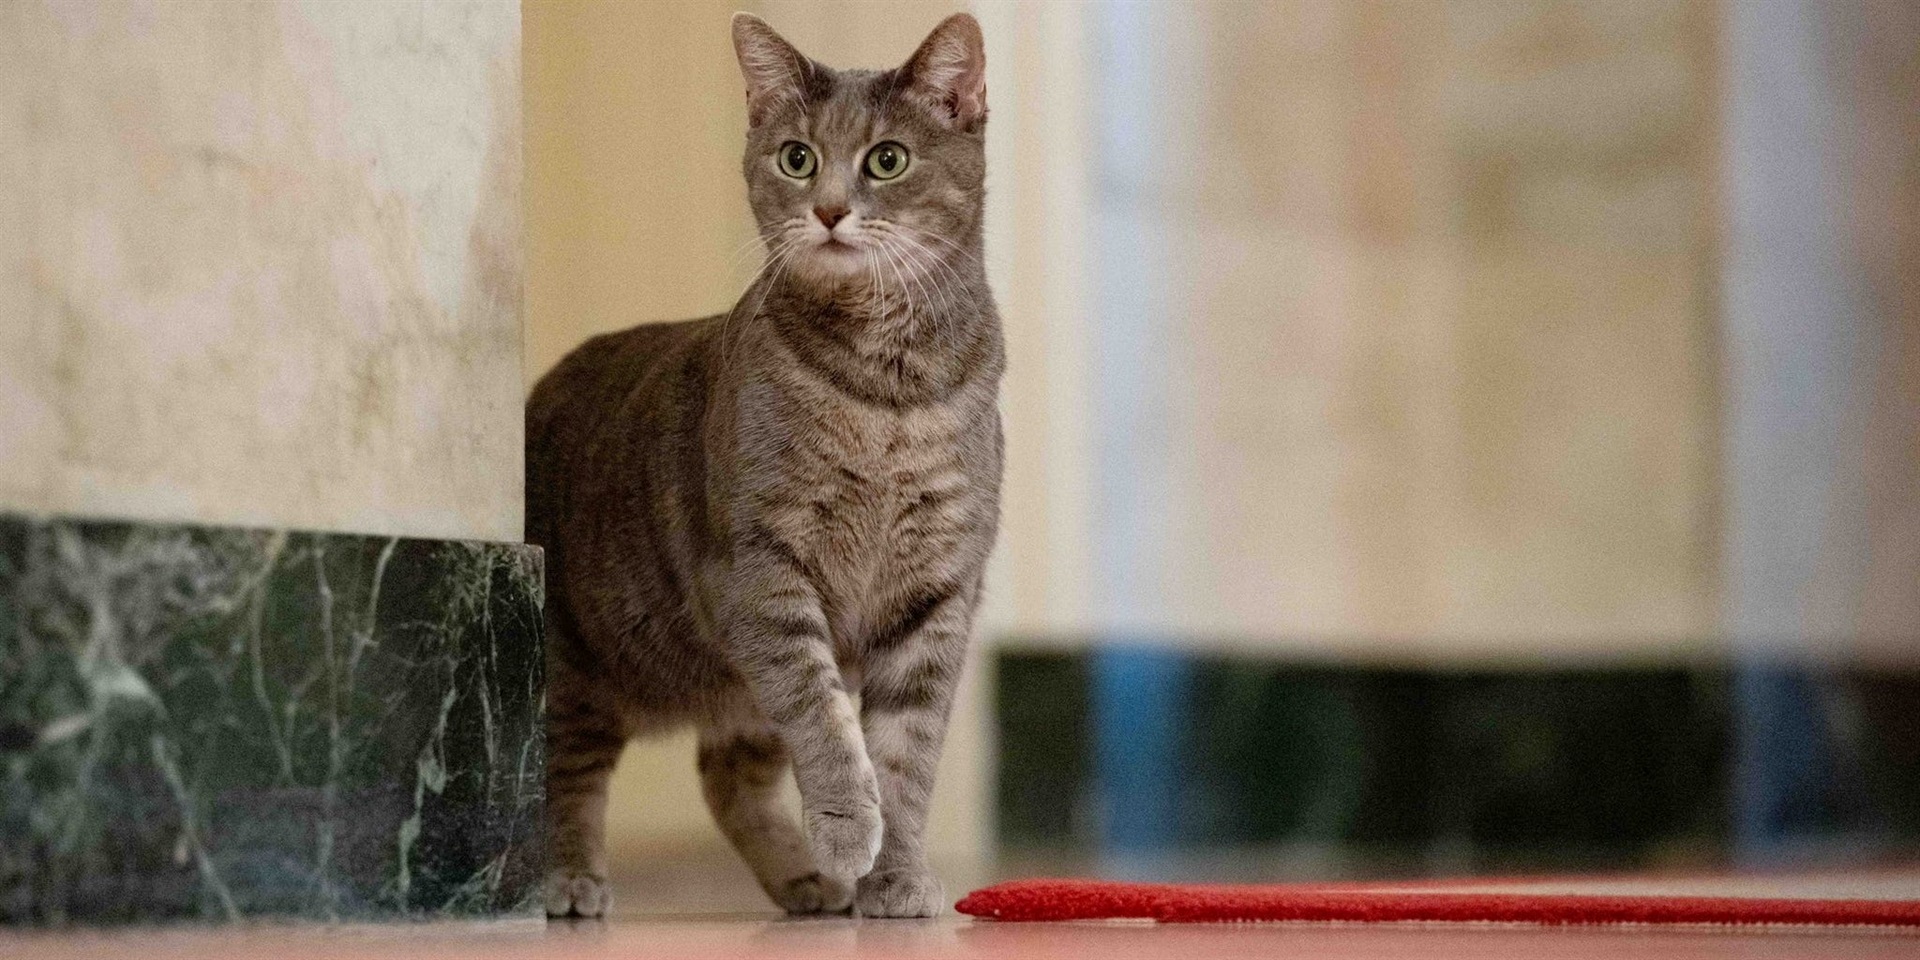 Businessinsider.co.za | Biden confirms that White House cat Willow has 'no limits' and sleeps on top of his head at night